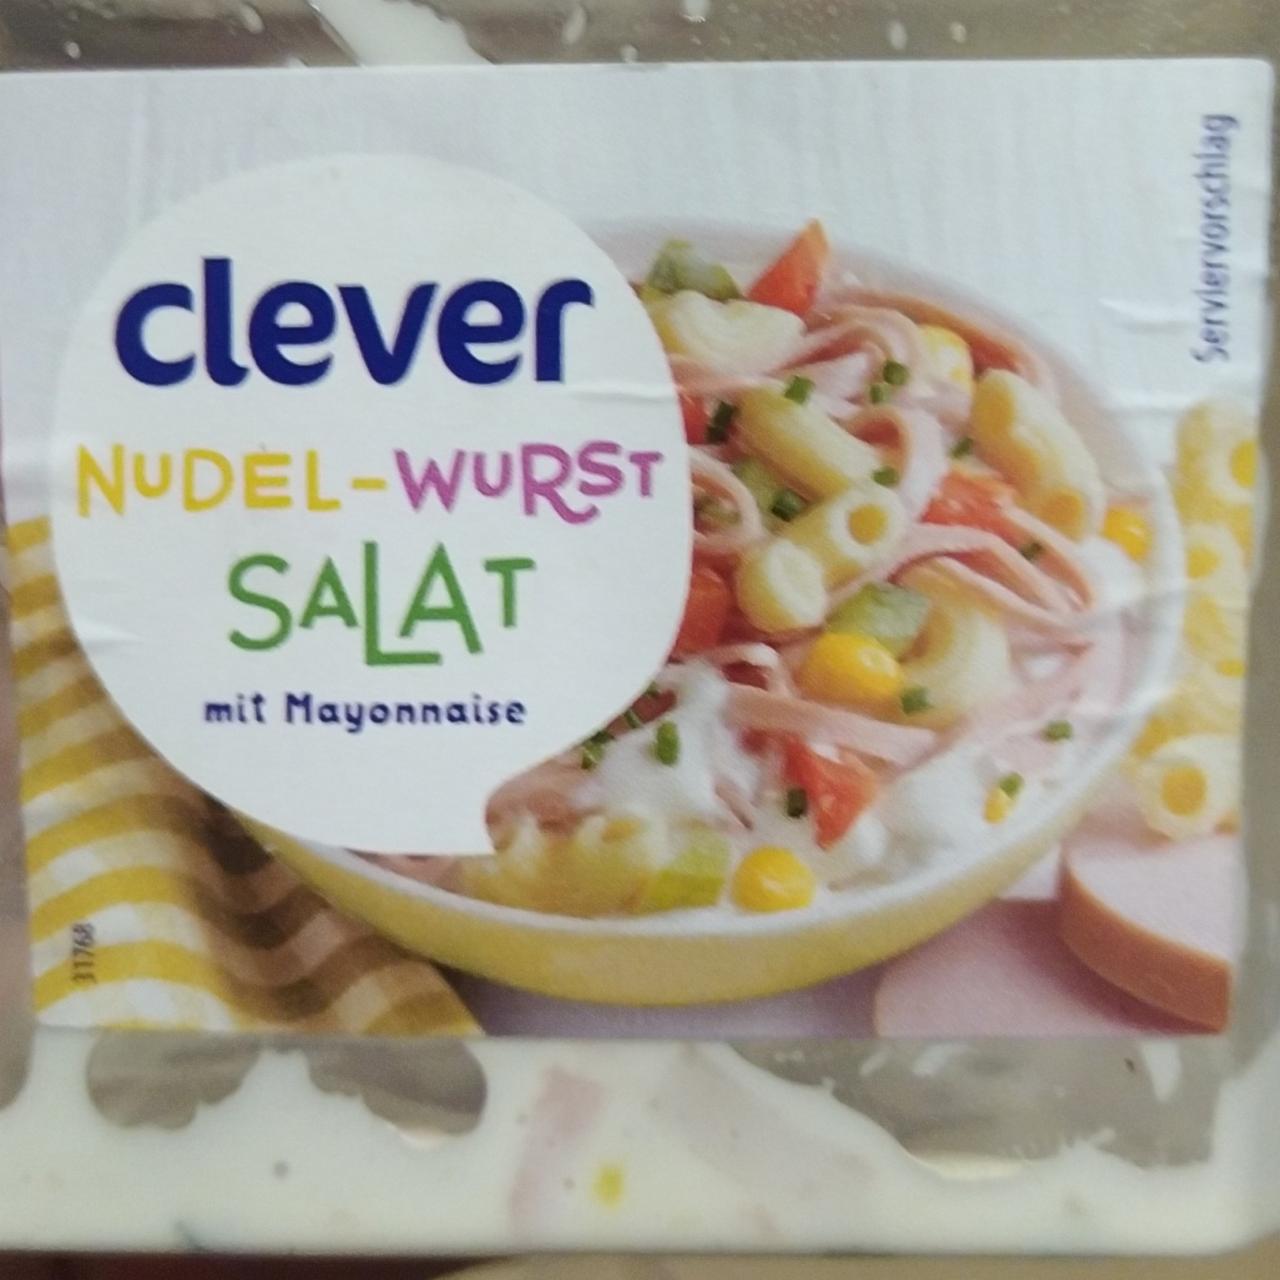 Fotografie - Nudel-wurst salat mit mayonnaise Clever